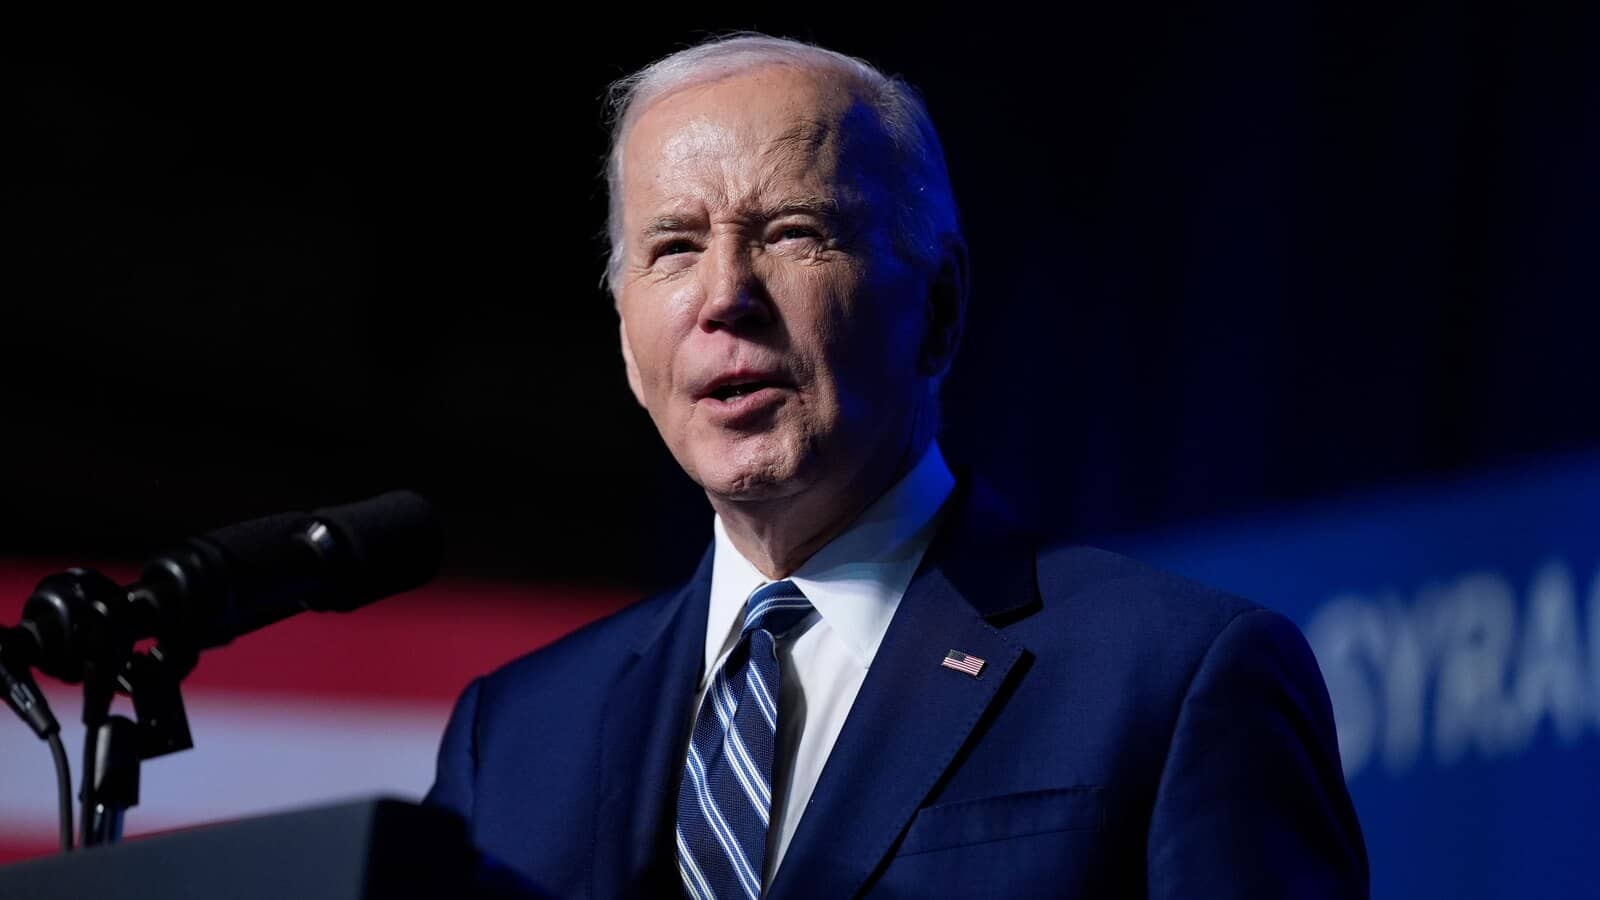 Biden celebrates computer chip factories, pitching voters on American ‘comeback’